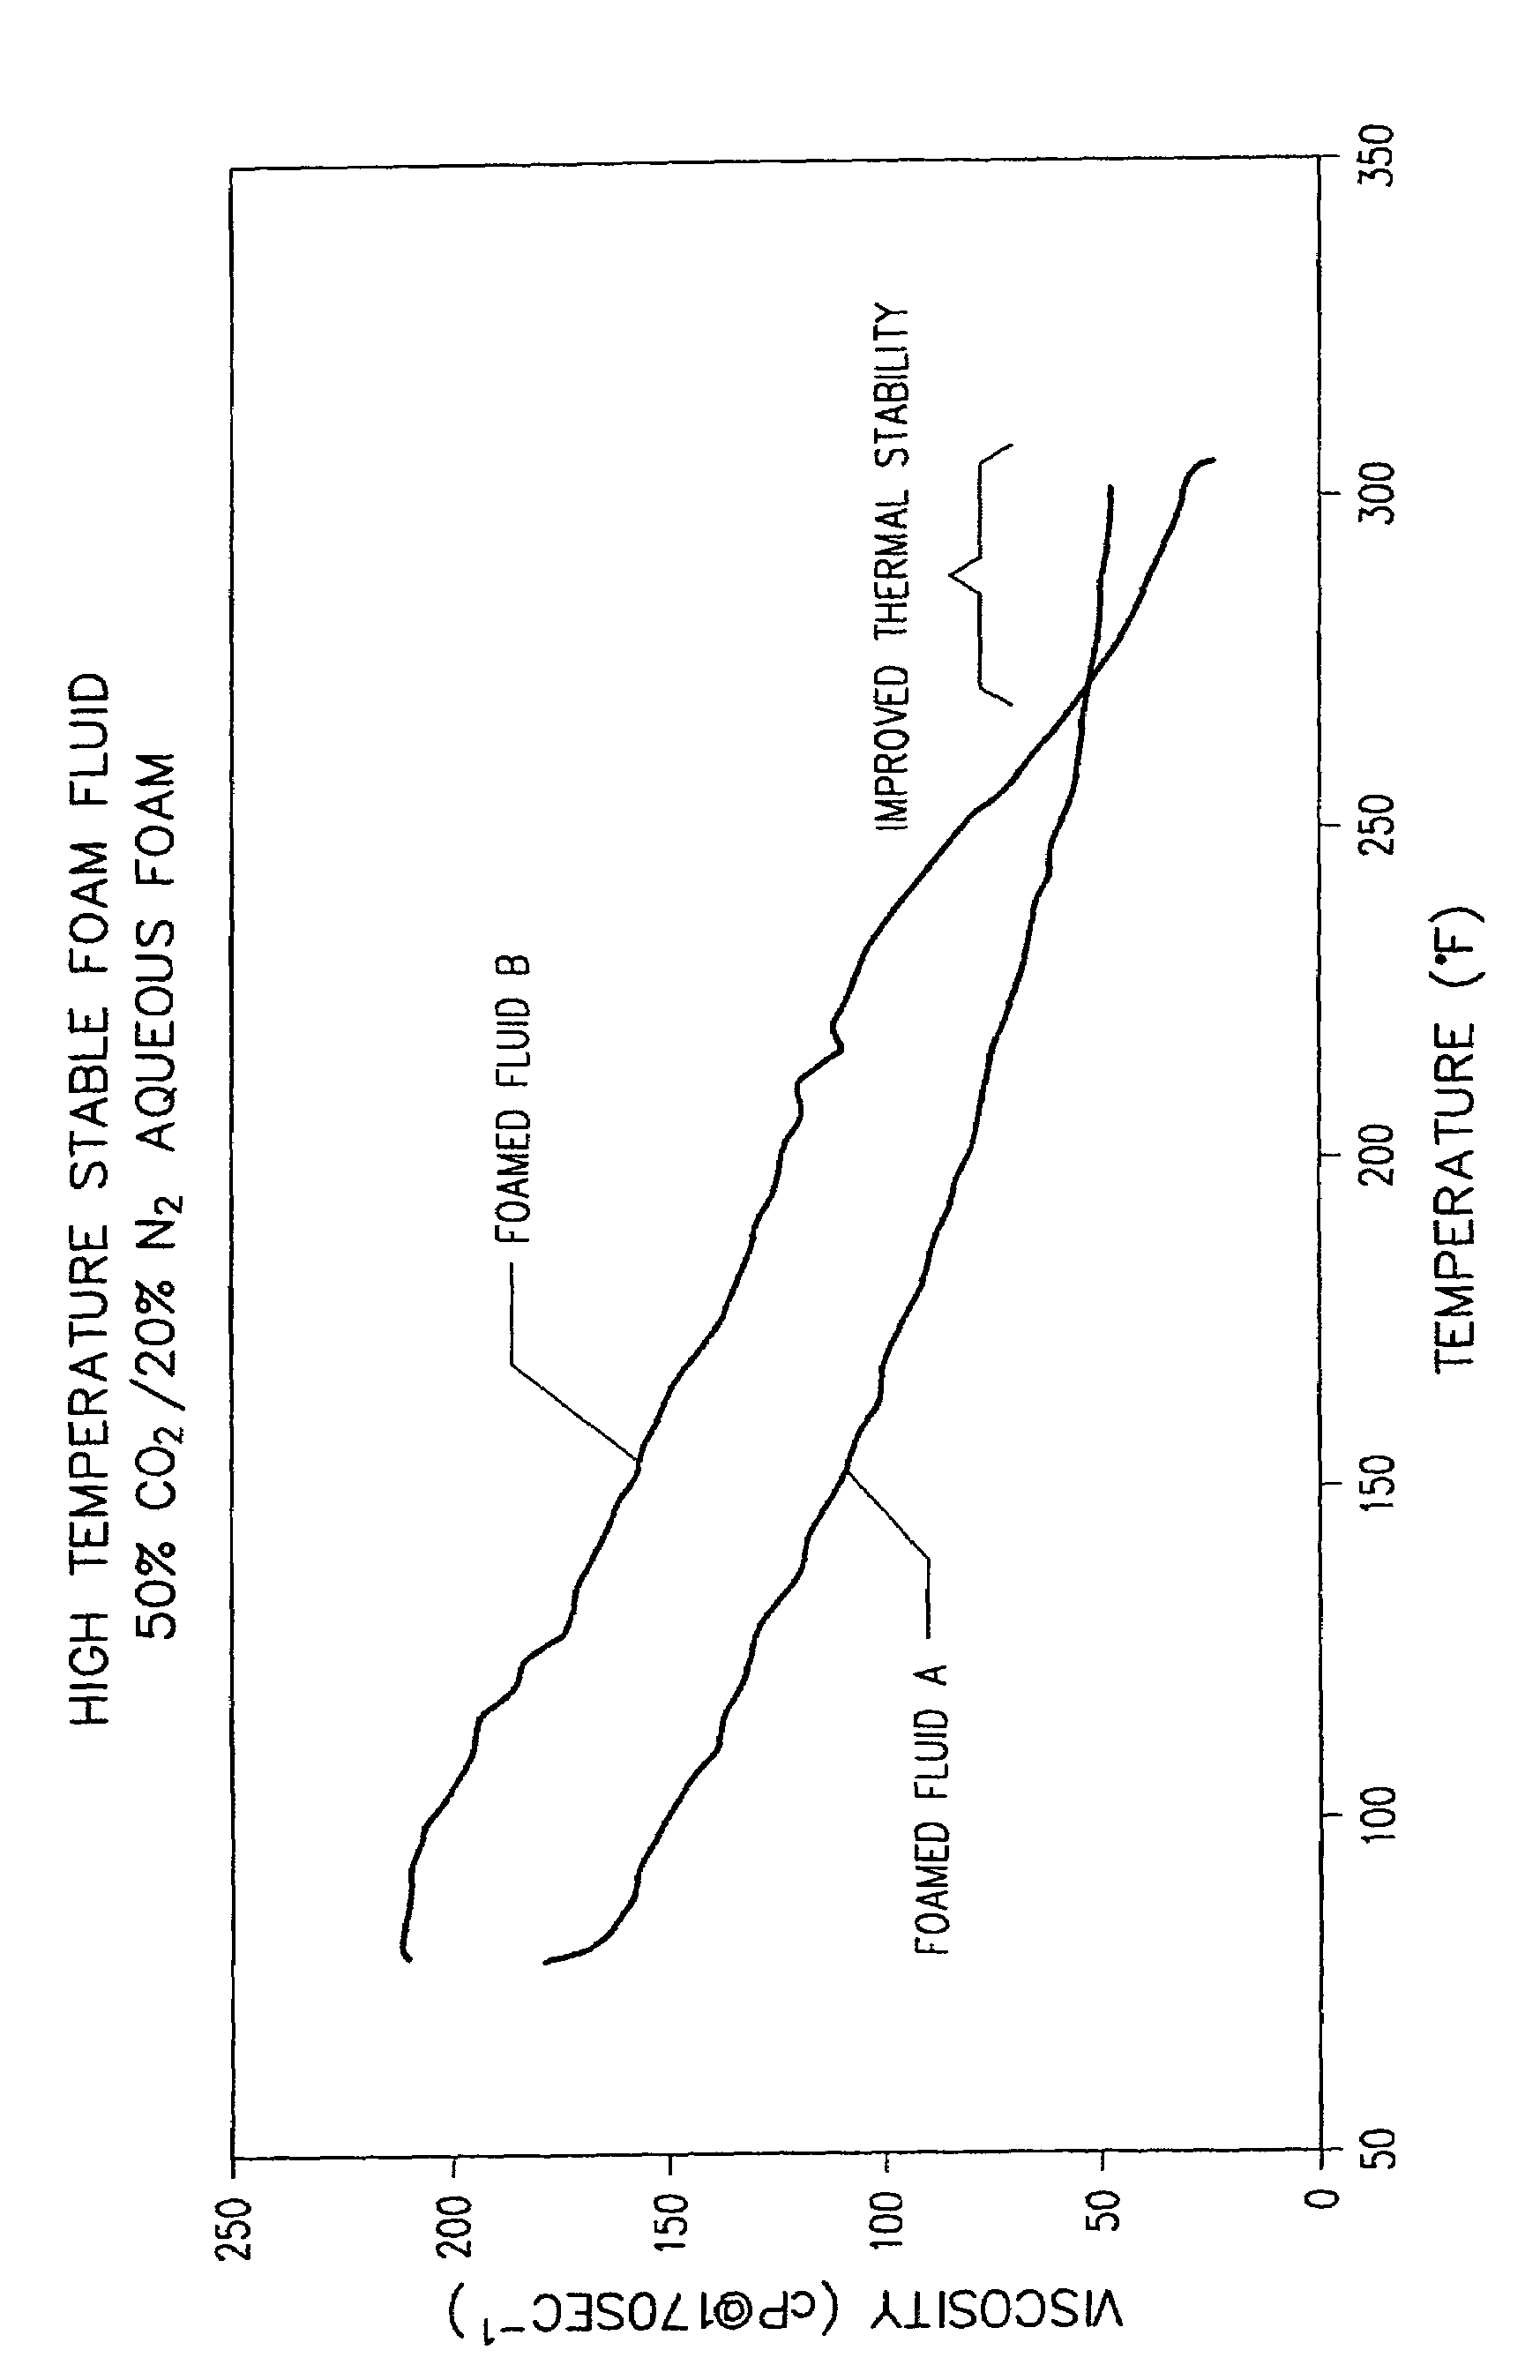 Methods of fracturing high temperature subterranean zones and foamed fracturing fluids therefor